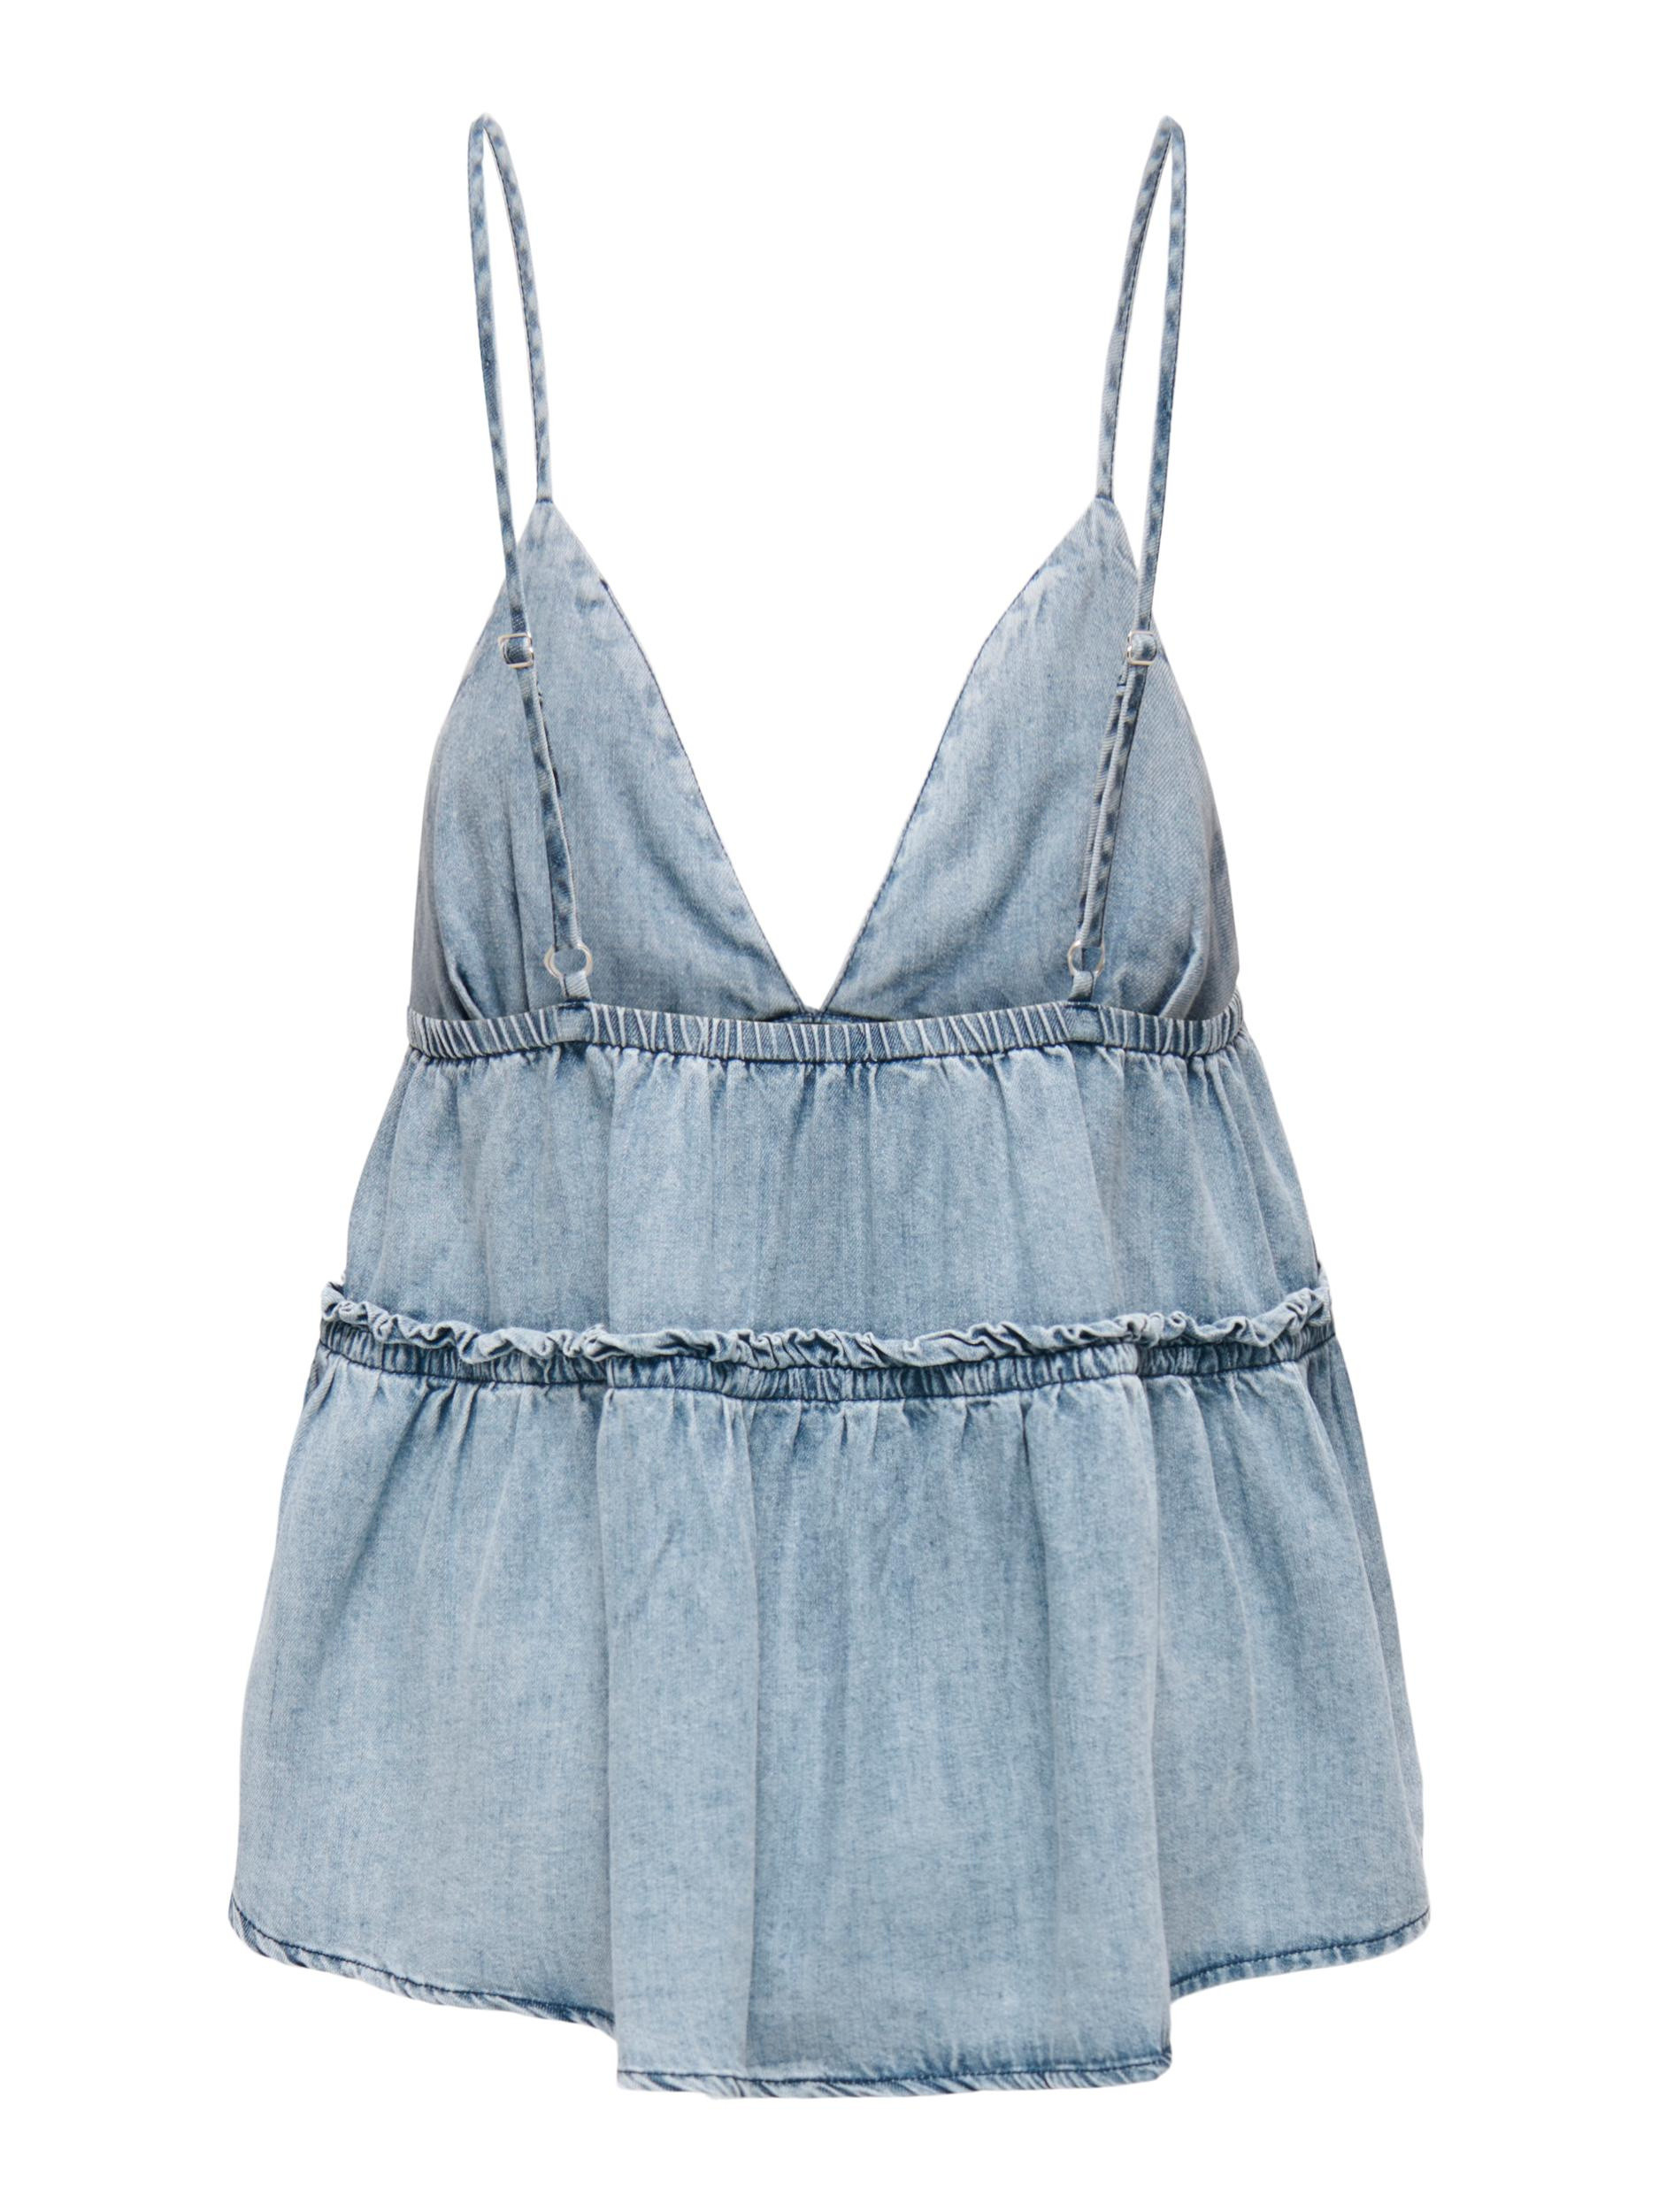 Only - Top with ruffles, Denim, large image number 1